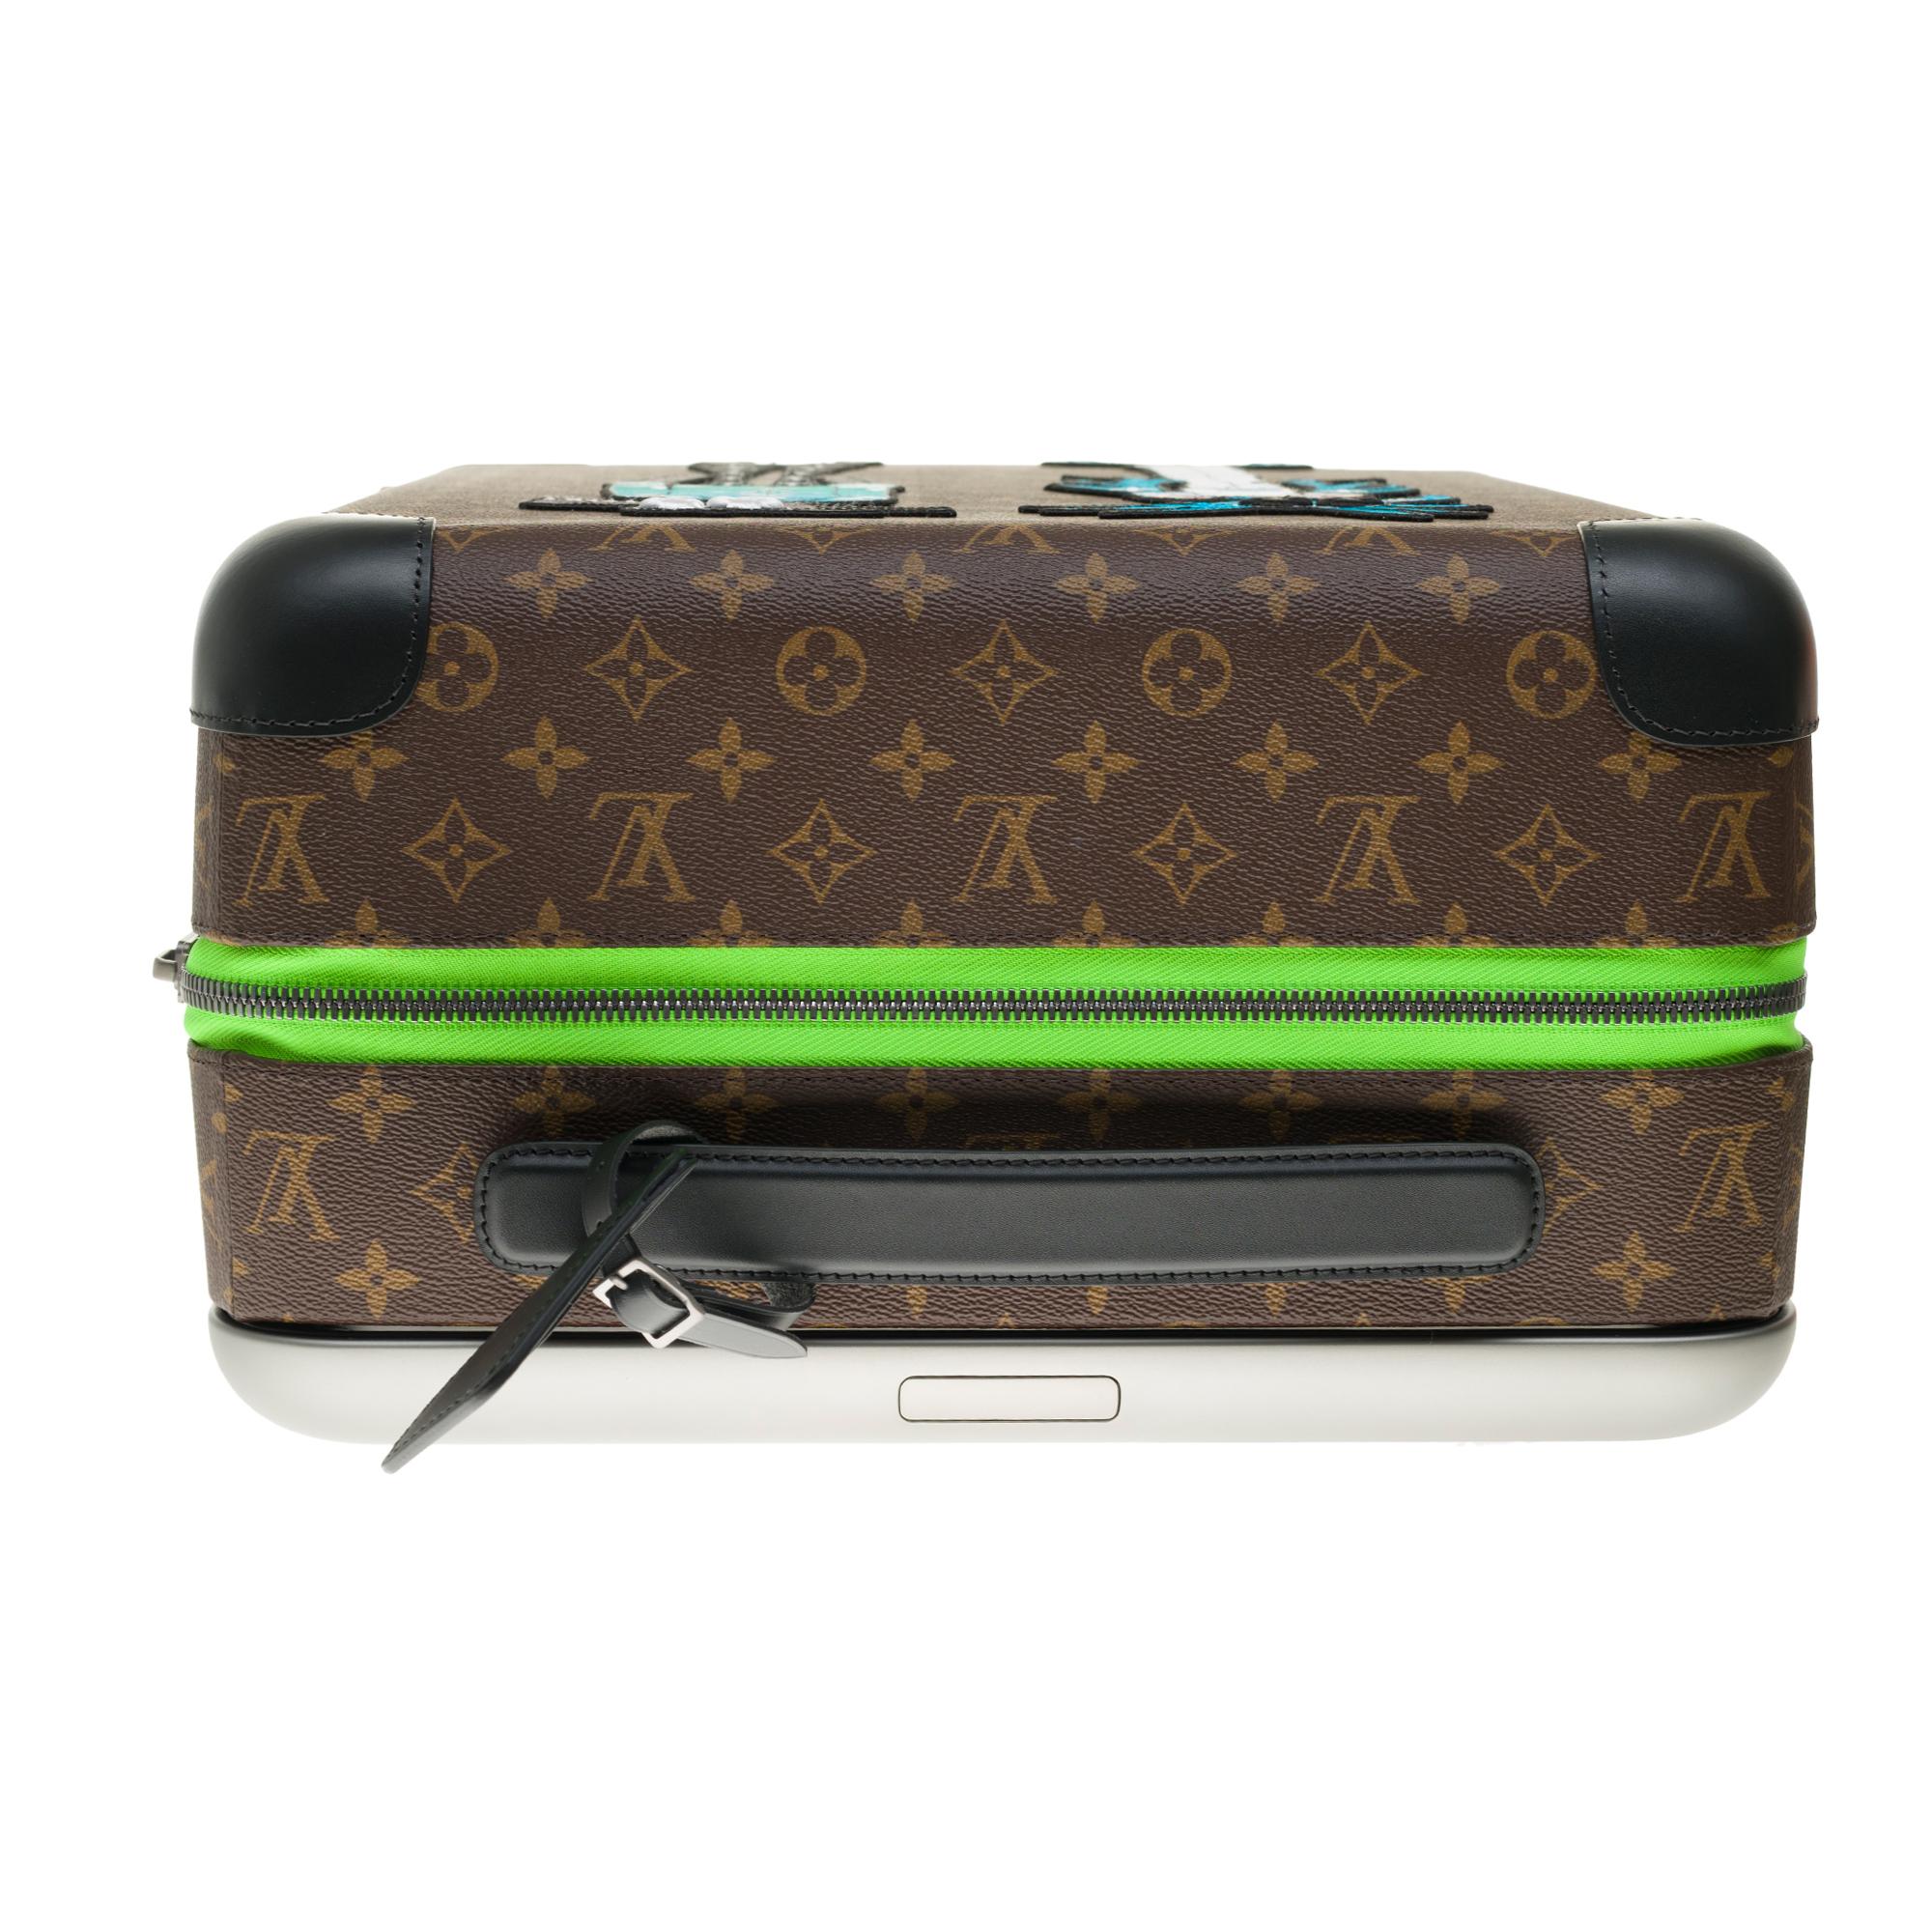 NEW/LIMITED EDITION/Louis Vuitton Horizon 55 Suitcase in brown monogram canvas 2